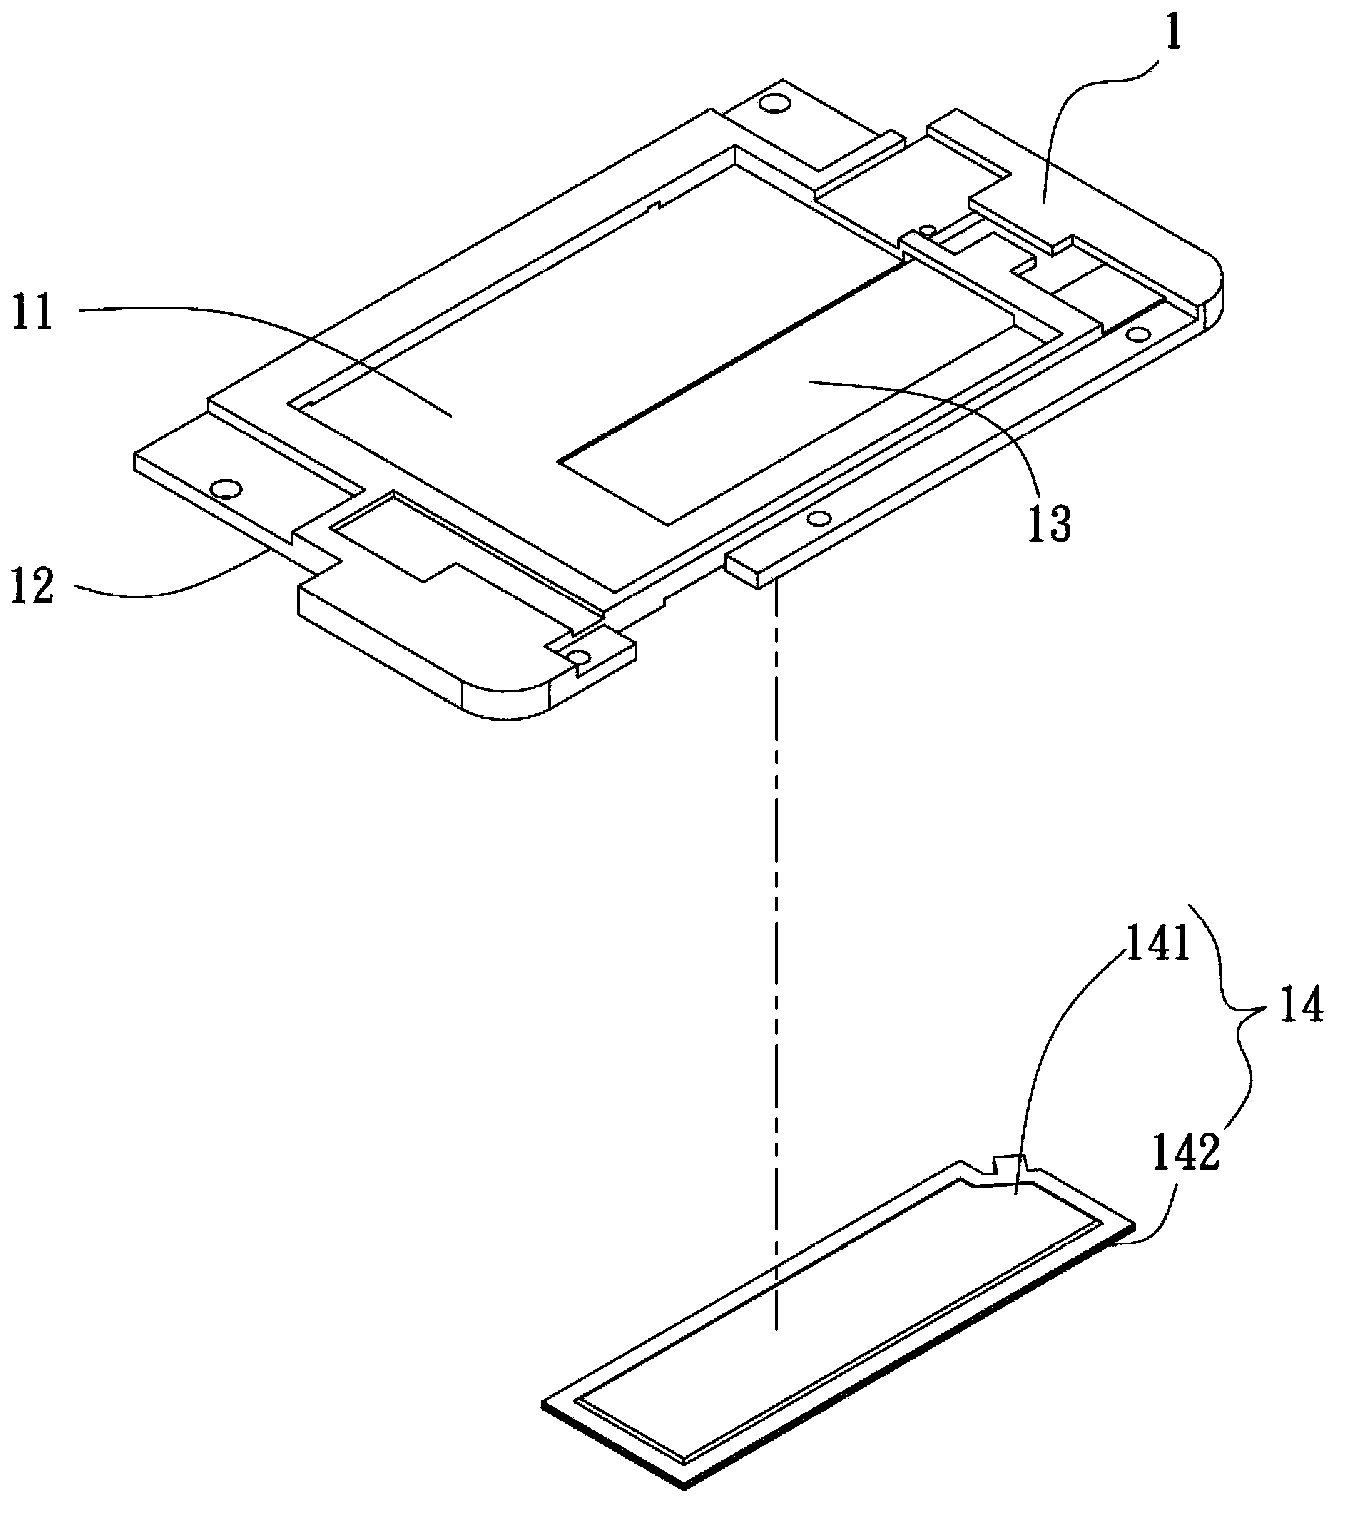 Heat radiation structure of handheld mobile device